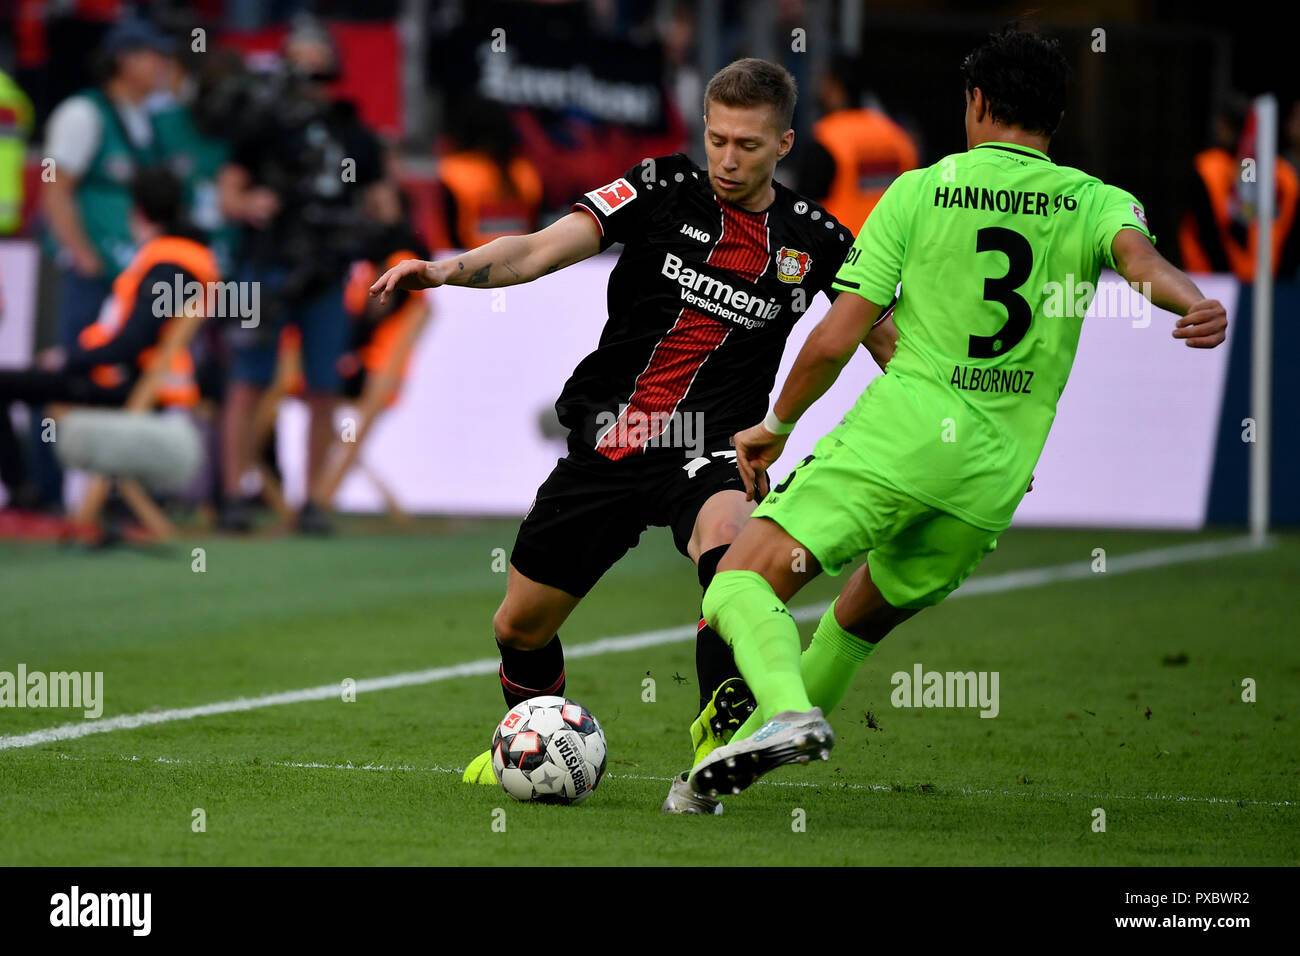 Leverkusen, Germany. 20th Oct, 2018. Mitchell Weiser (L) of Bayer 04 Leverkusen vies with Miiko Albornoz of Hannover 96 during a German Bundesliga match between Bayer 04 Leverkusen and Hannover 96 in Leverkusen, Germany, on Oct. 20, 2018. The match ended with a 2-2 draw. Credit: Joachim Bywaletz/Xinhua/Alamy Live News Stock Photo